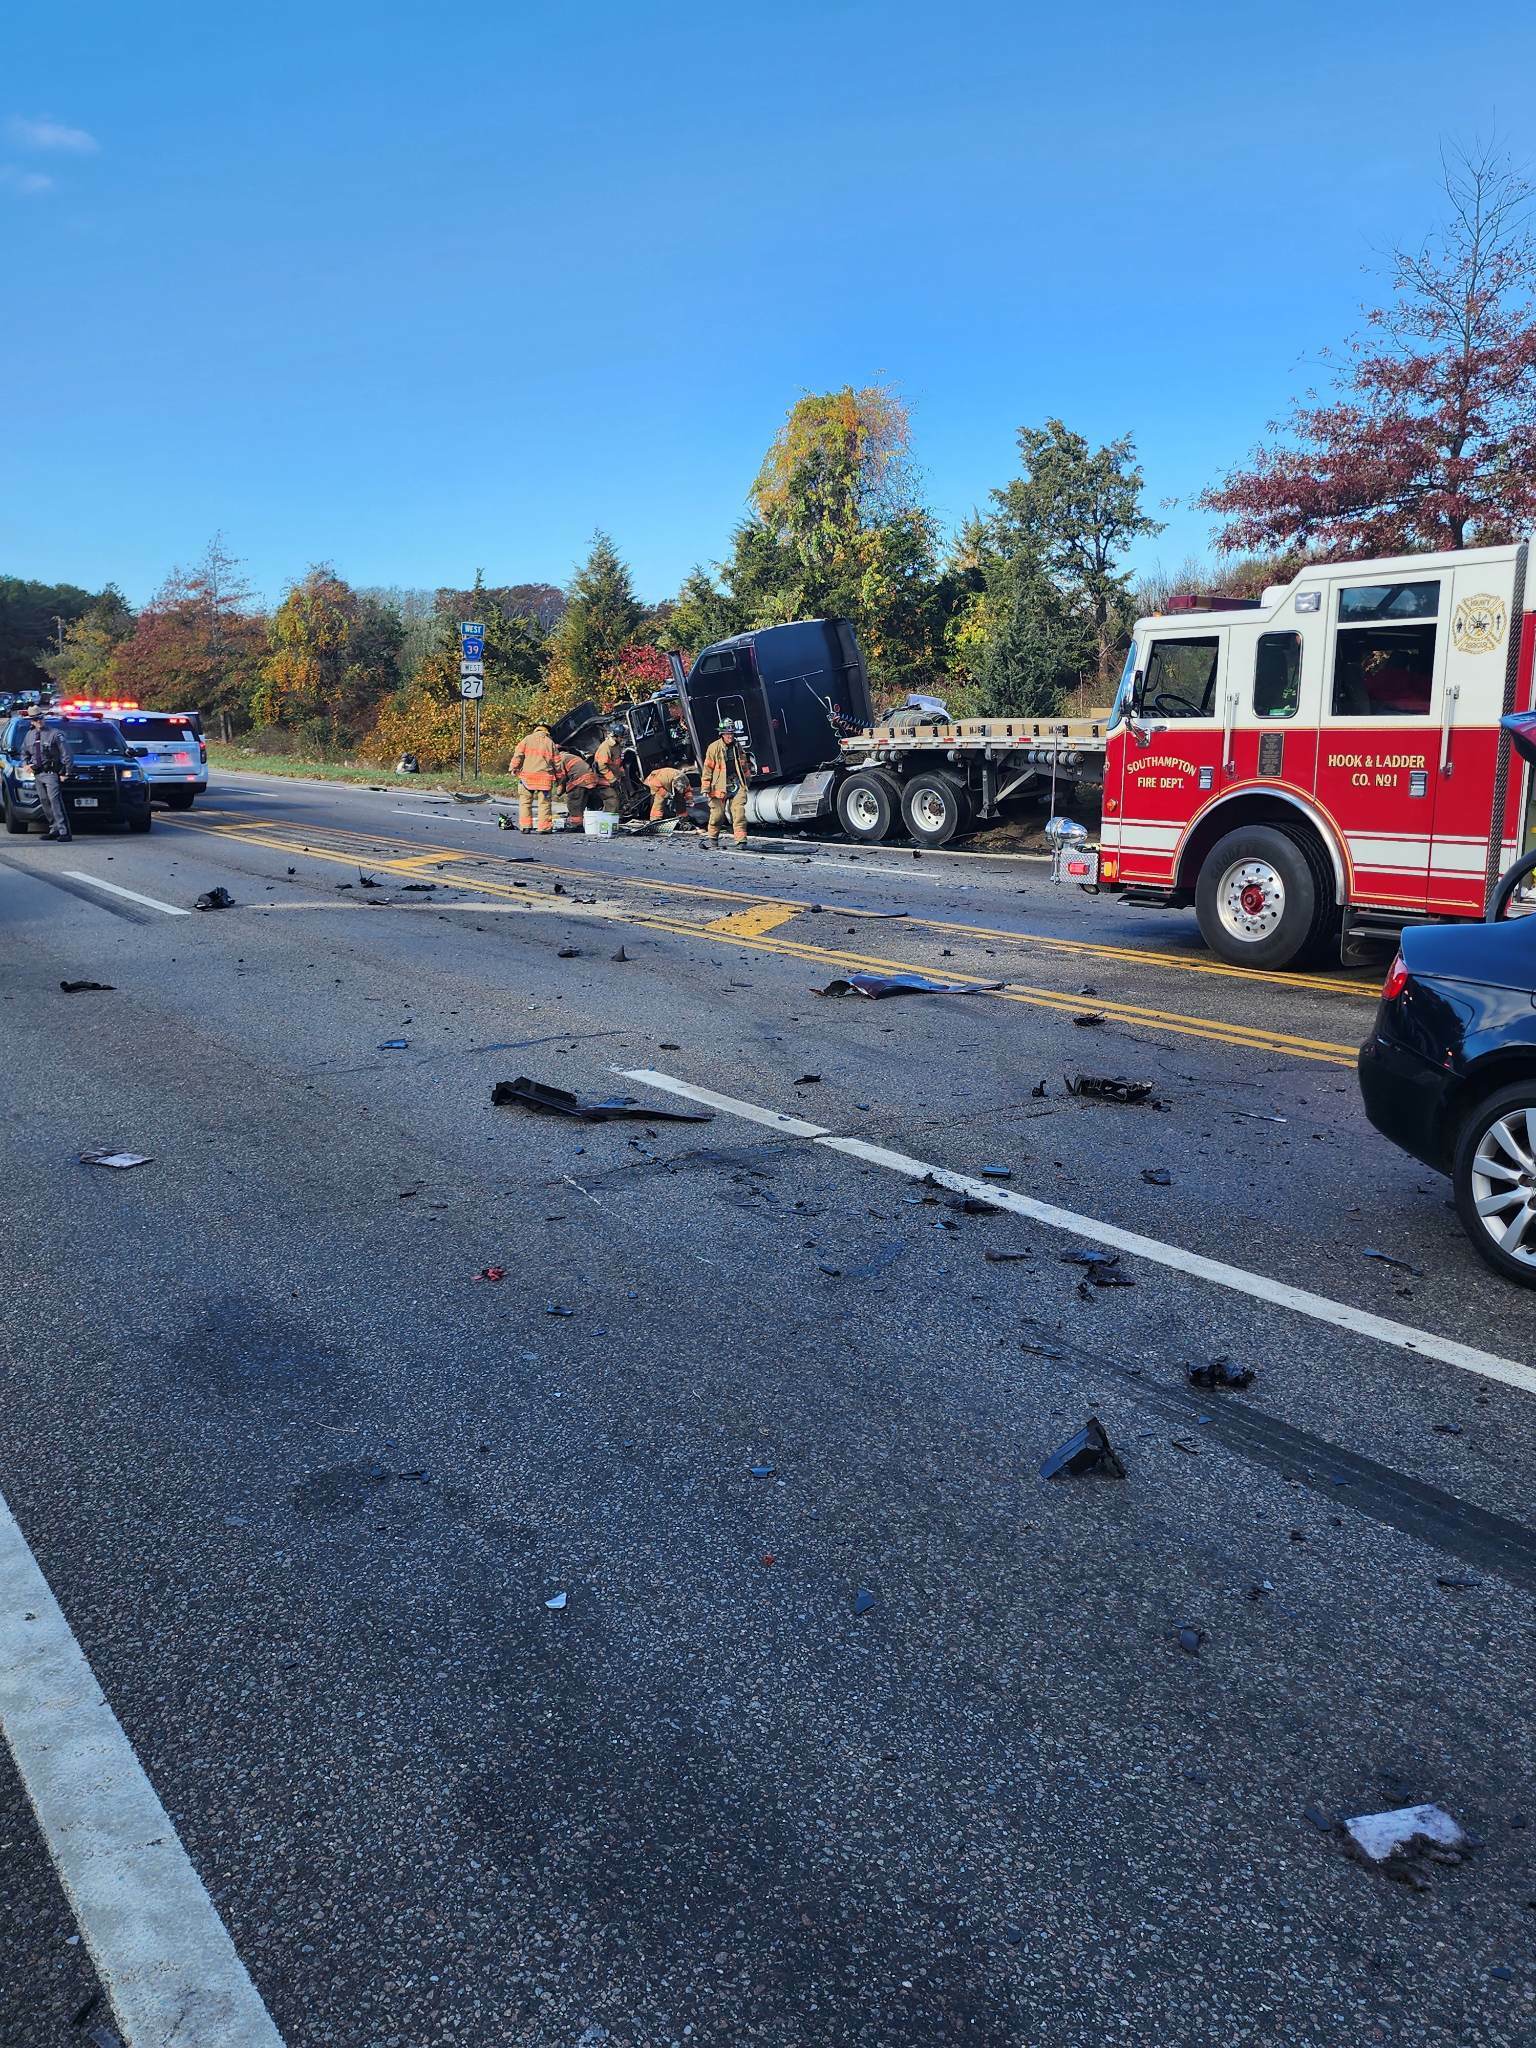 Debris from the wreckage scattered across County Road 39 following the multi-car crash in Southampton.    COURTESY LAMAR ROBINSON